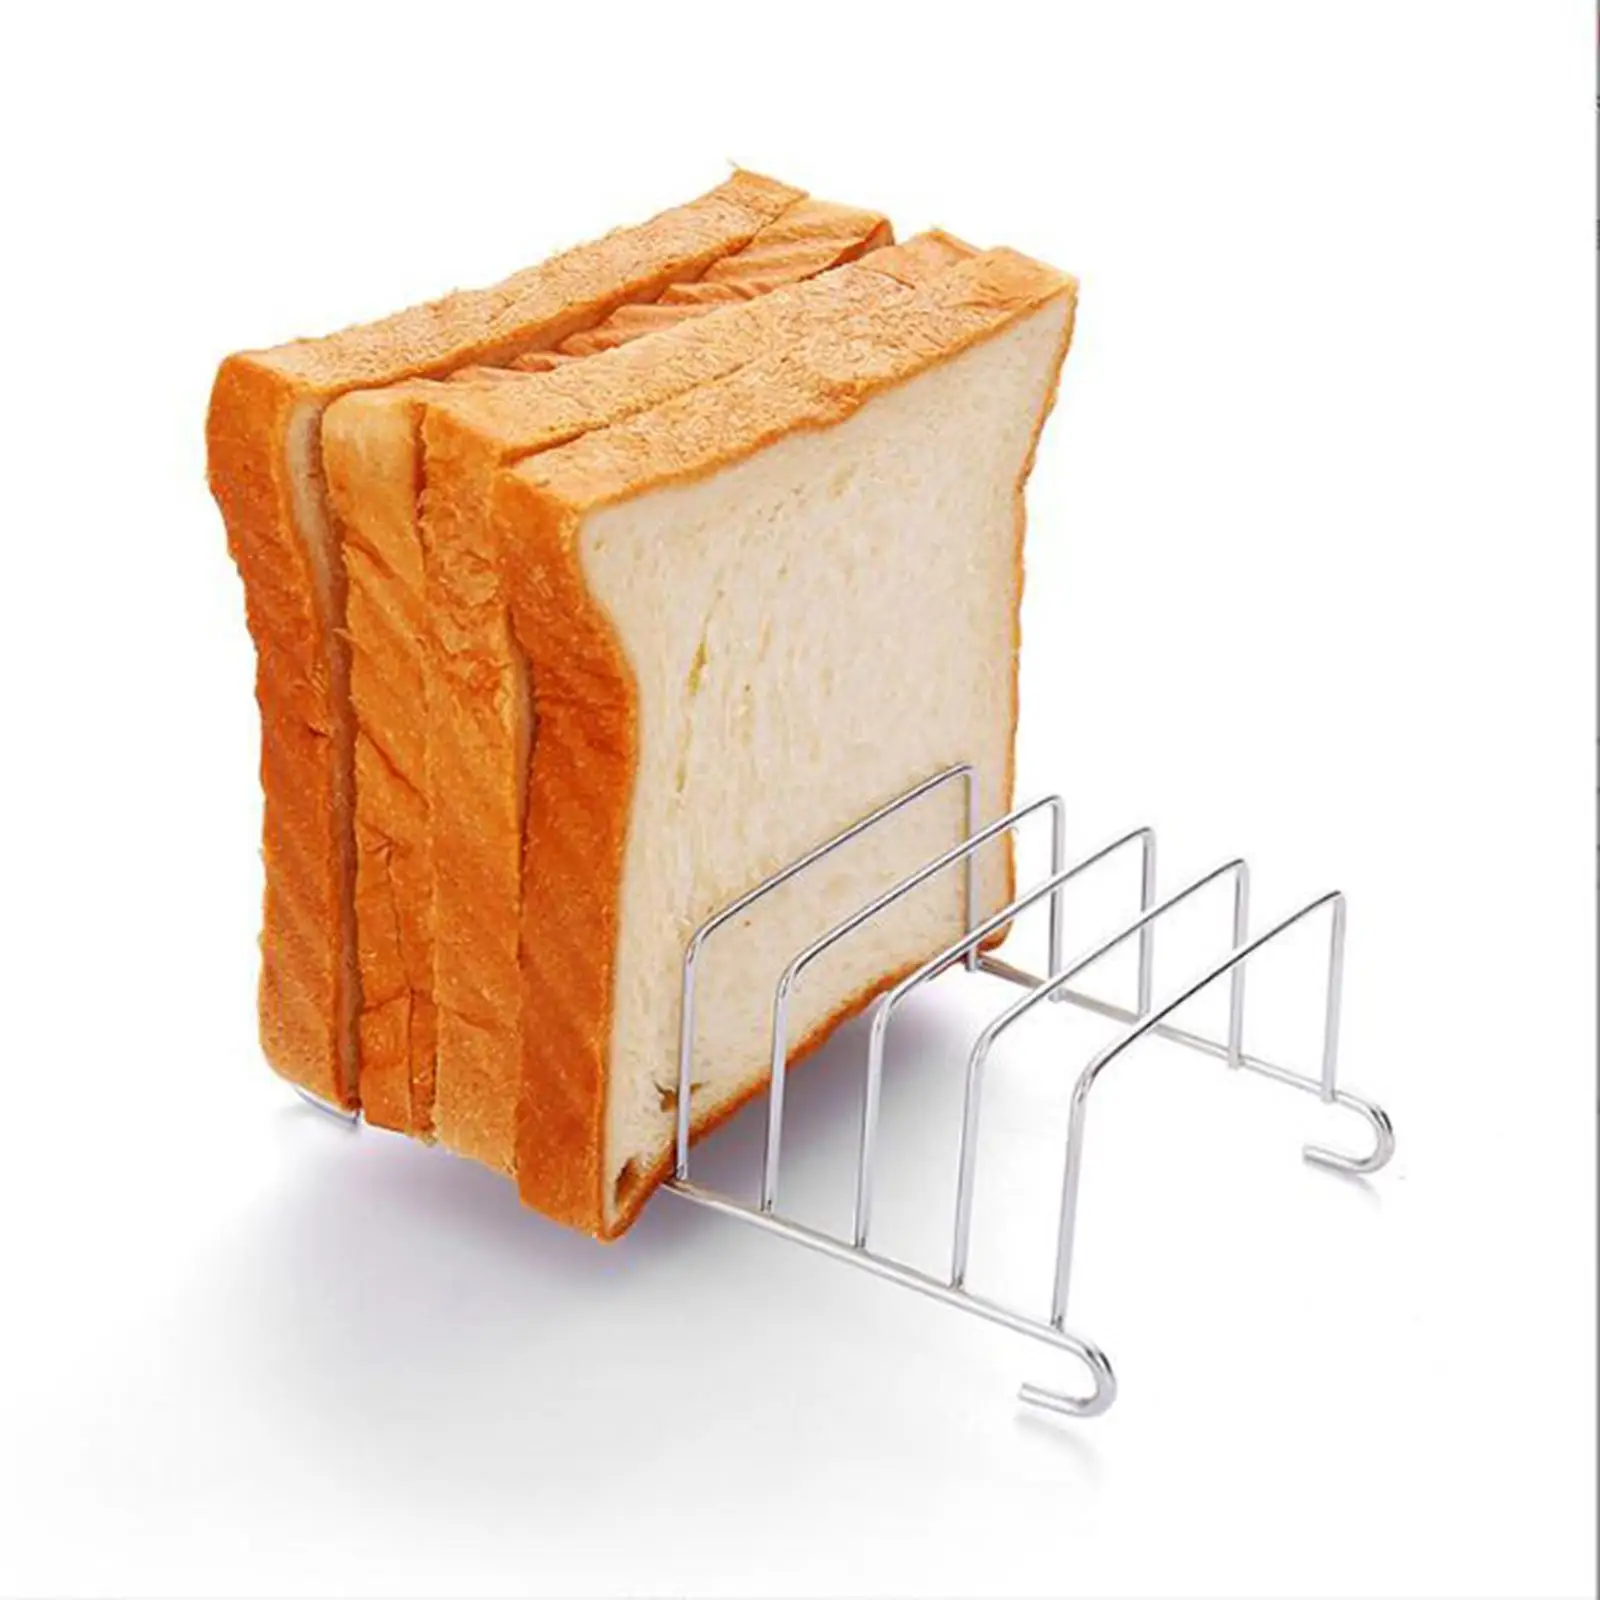 Stainless Food Display Stand Portable Storing Bread Bread Rack Toast Rack Holding for Oven